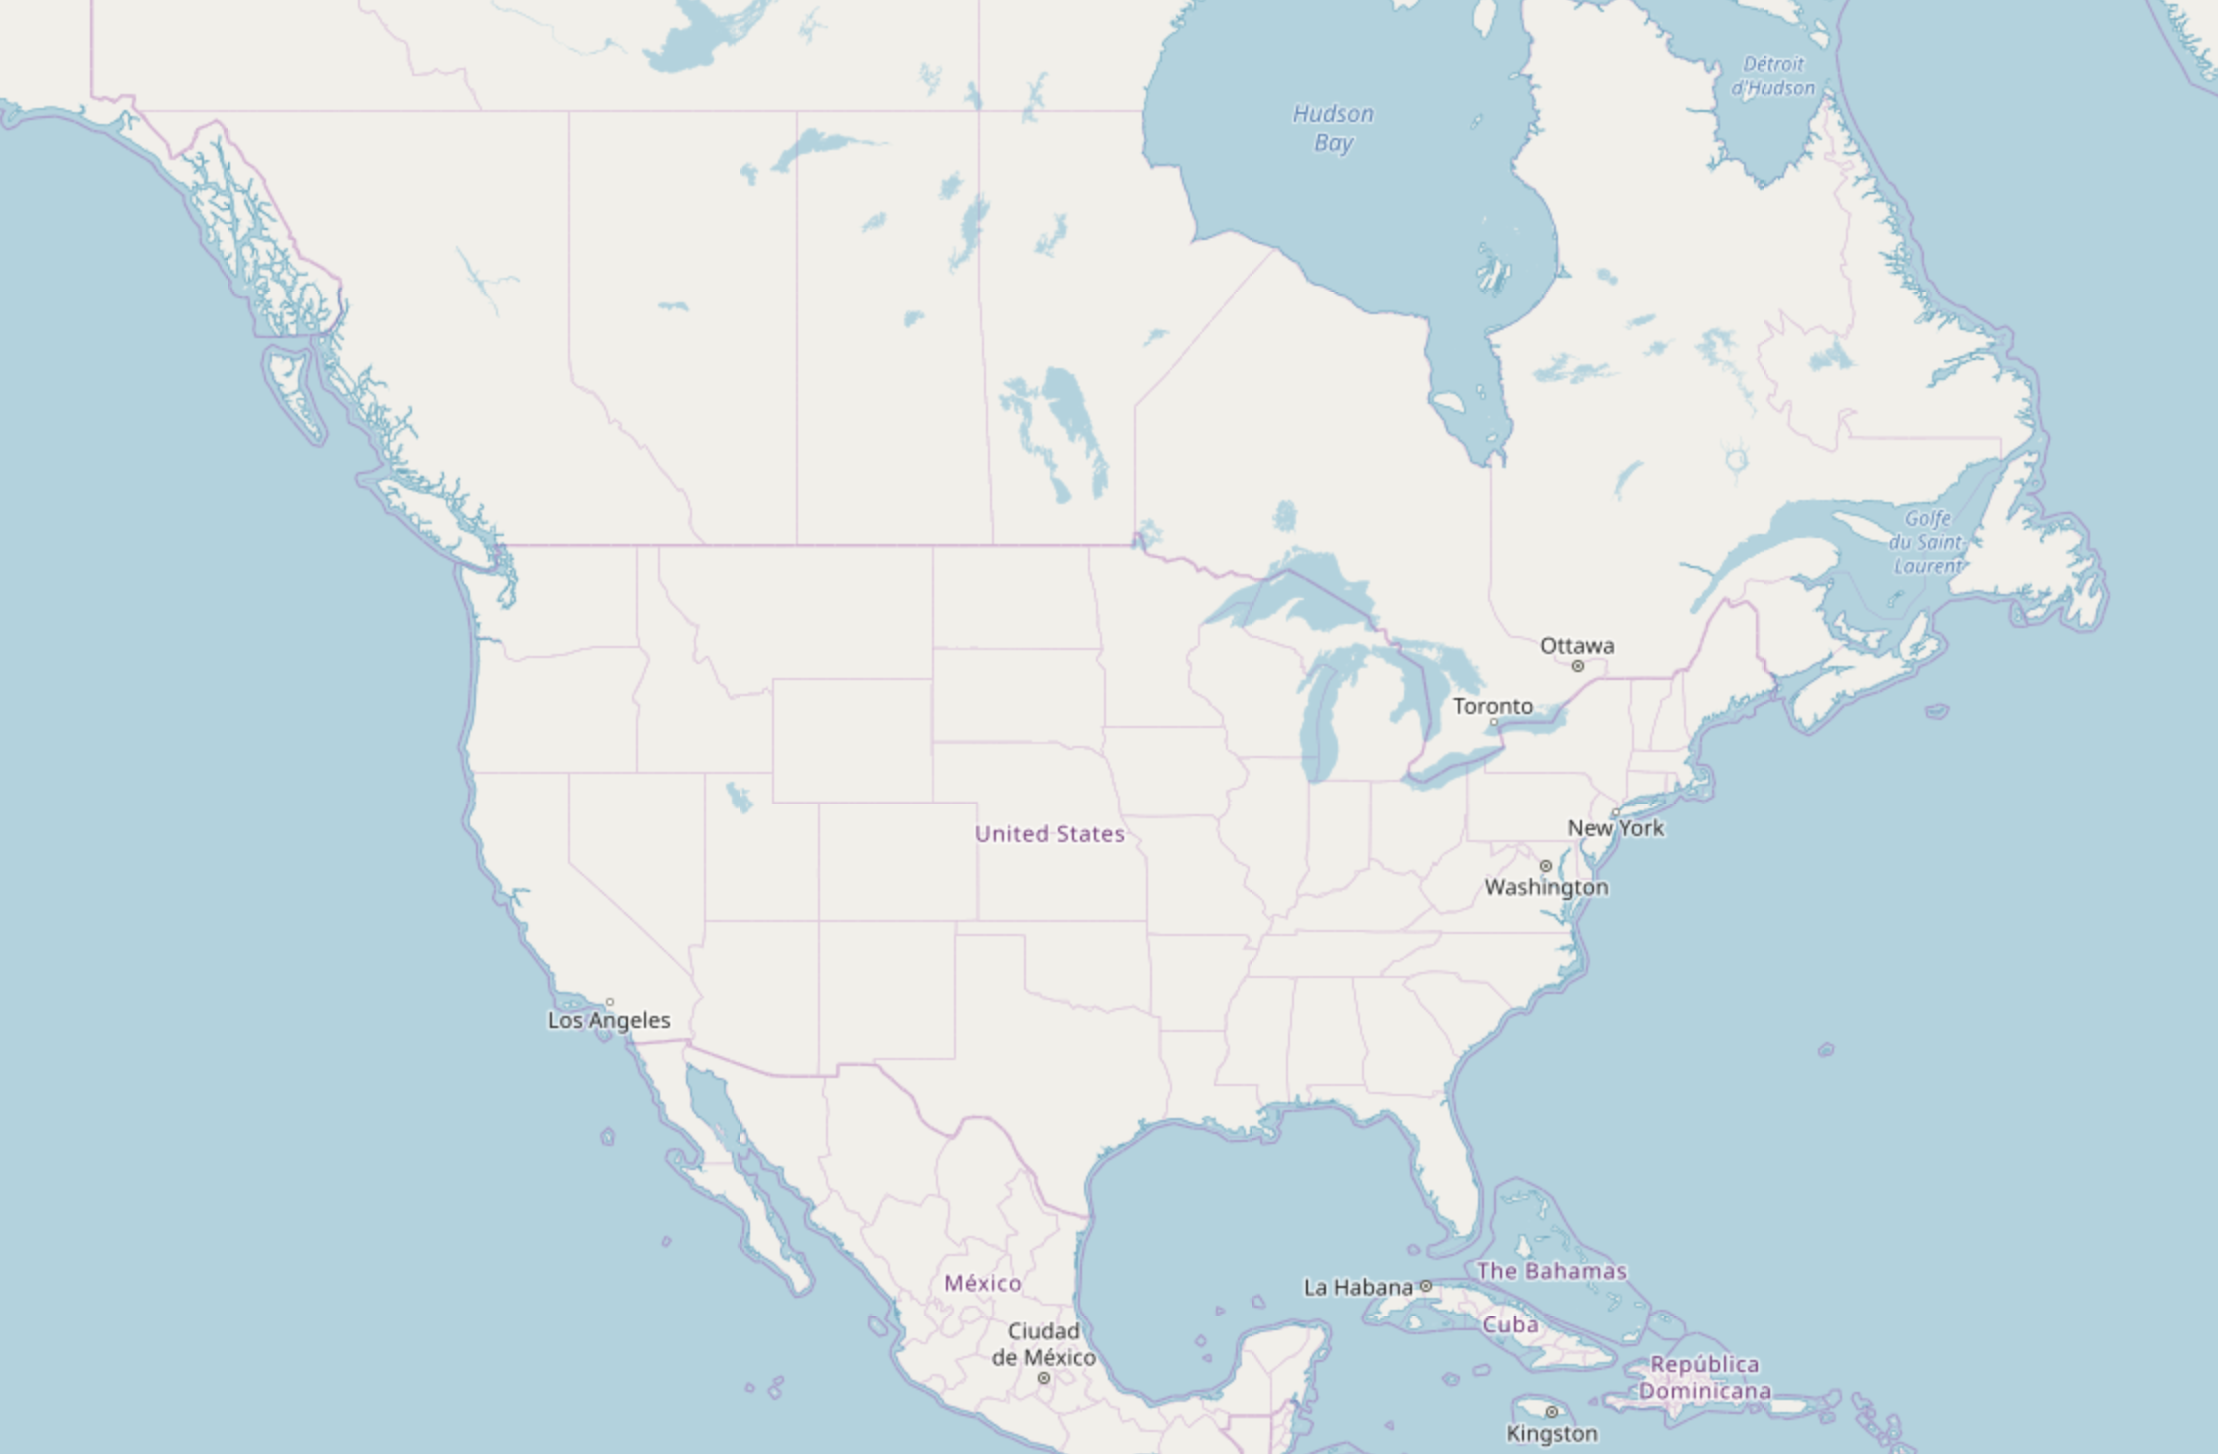 OpenStreetMap map of the North American continent